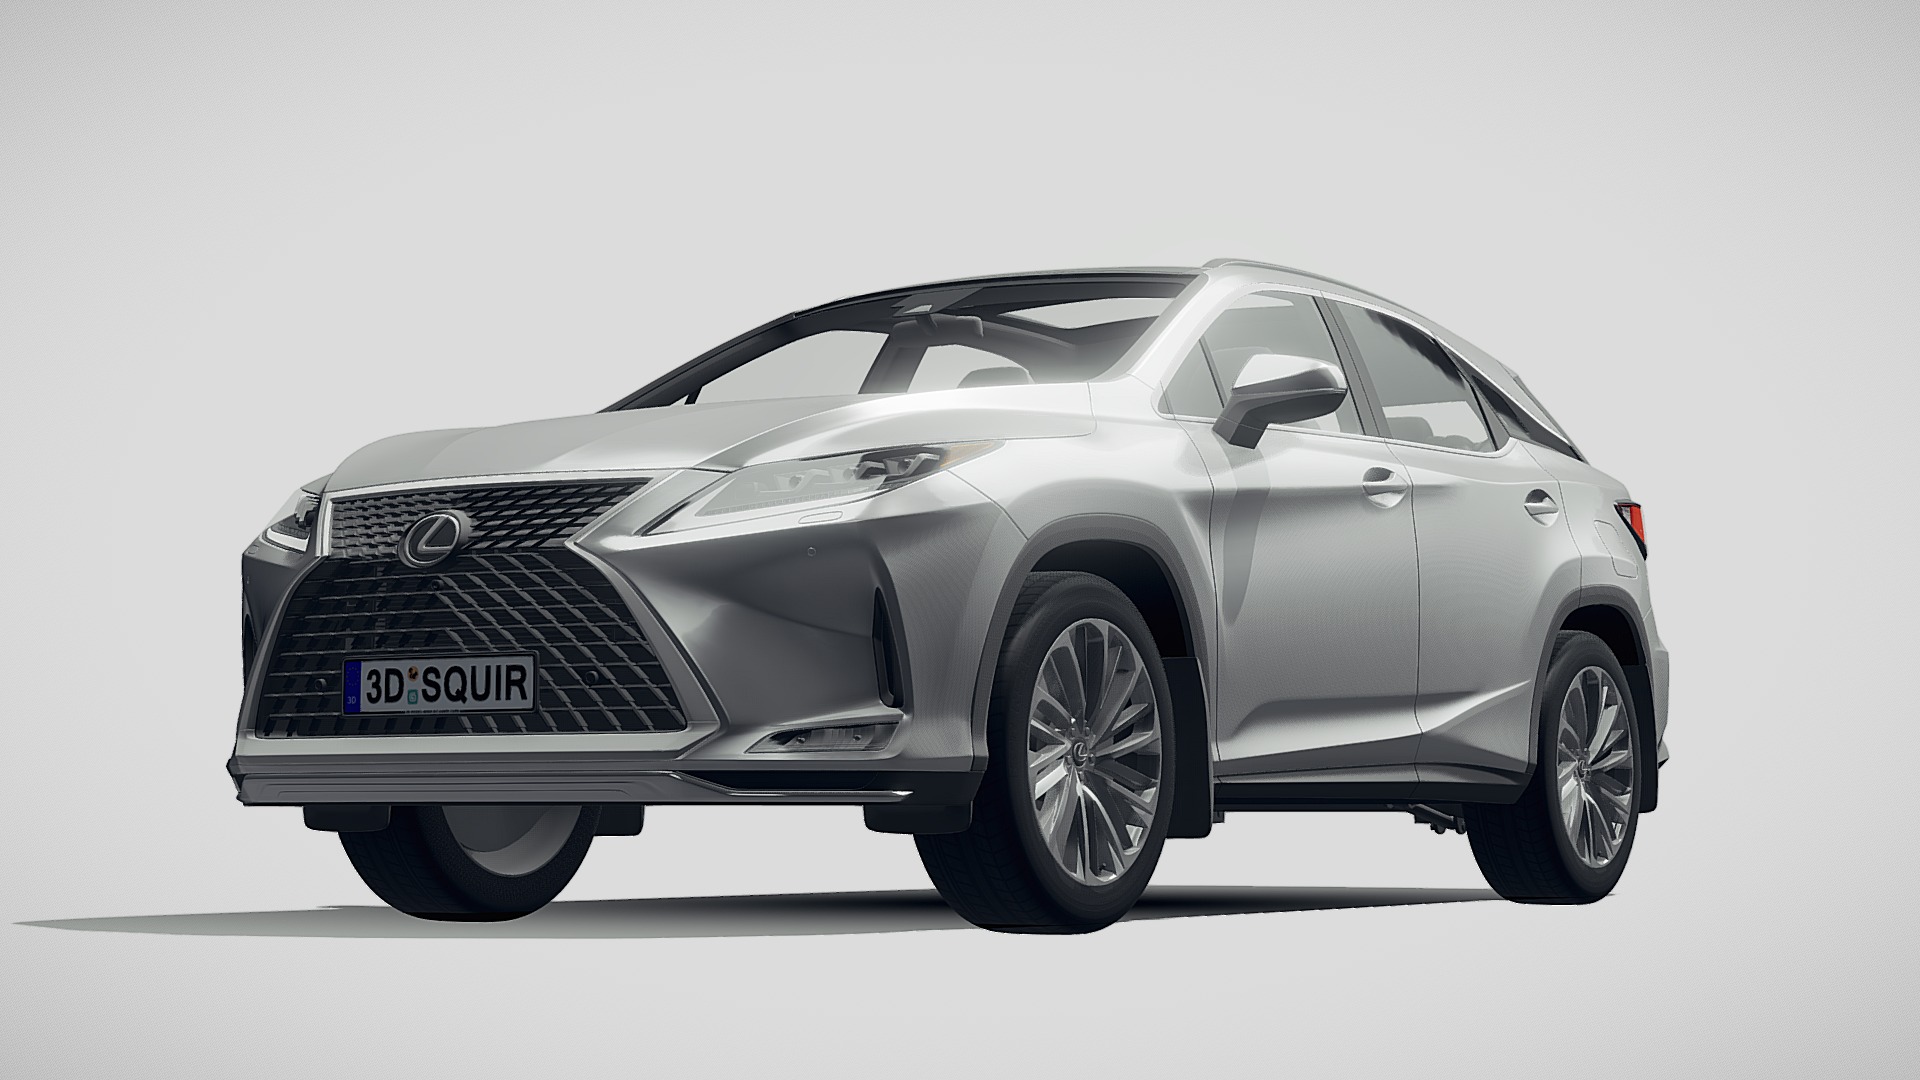 3D model Lexus RX 2020 - This is a 3D model of the Lexus RX 2020. The 3D model is about a silver car with a black grill.